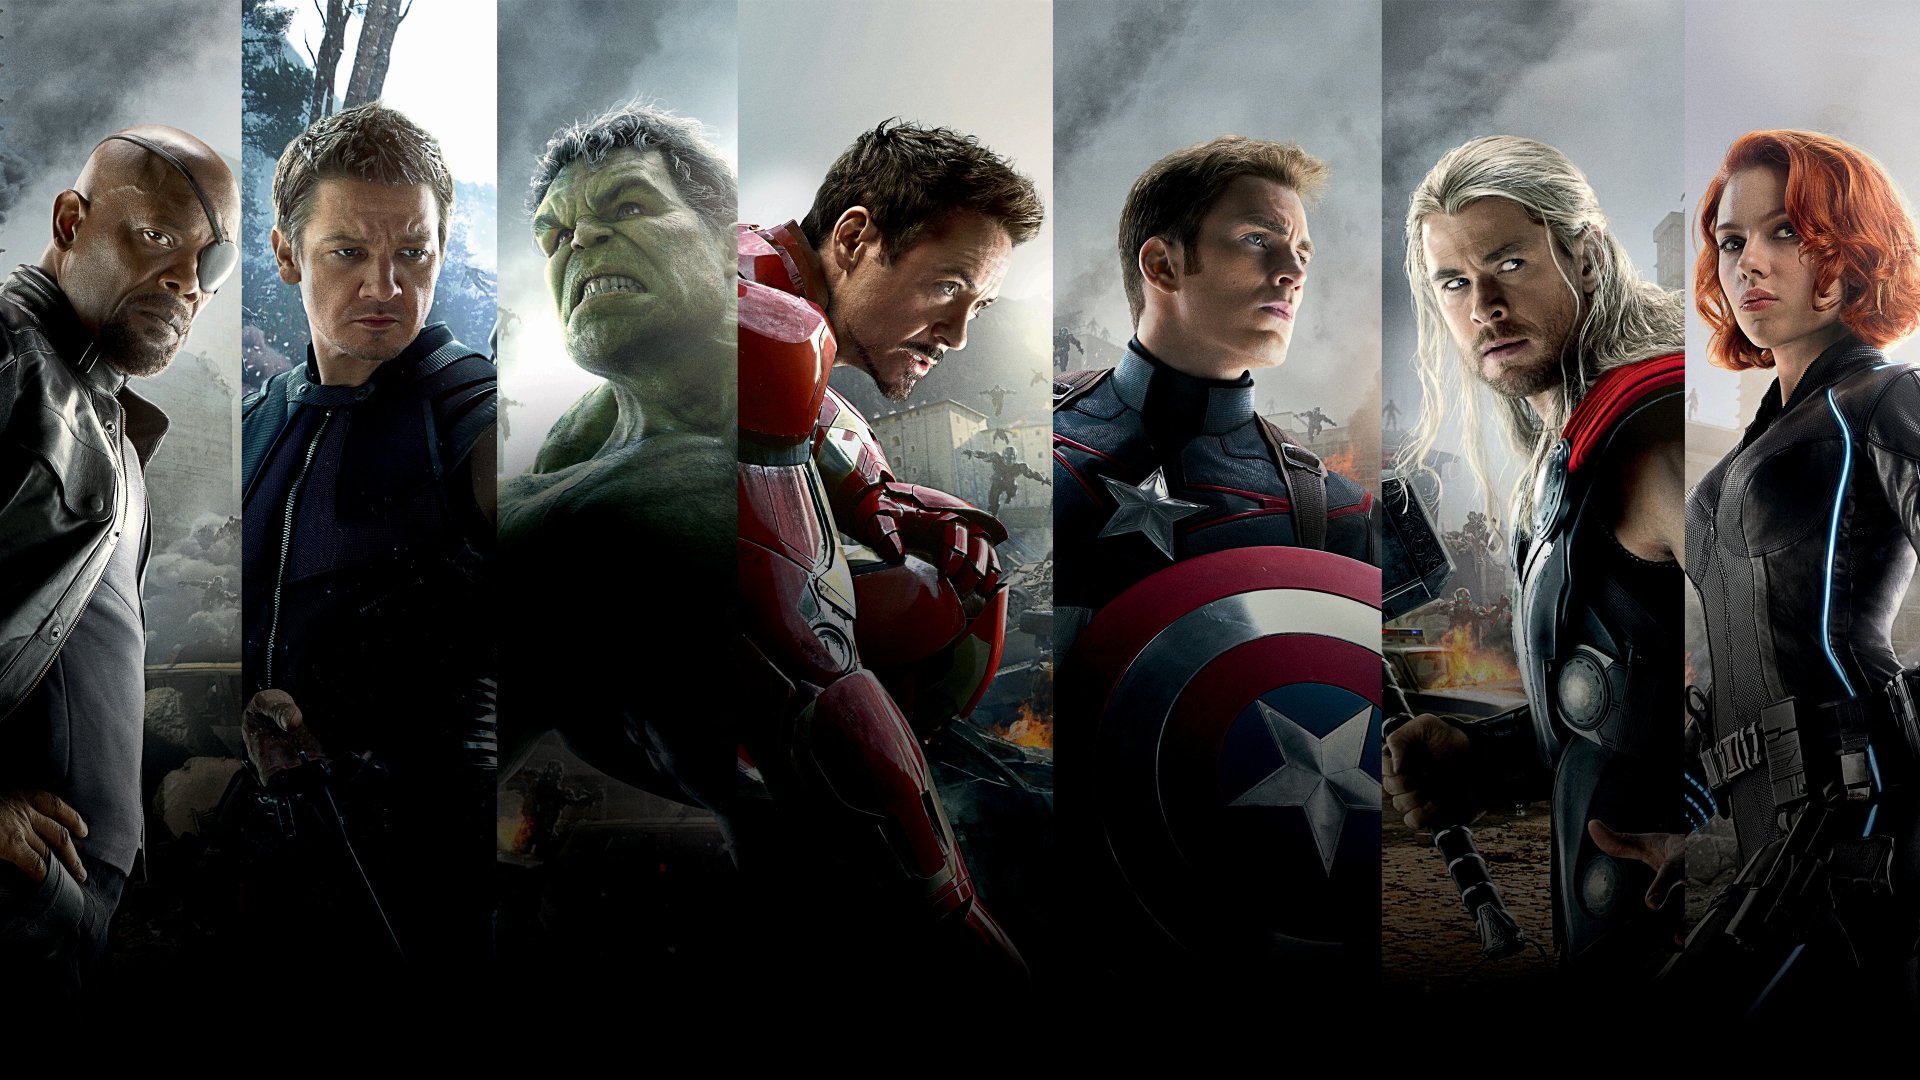 avengers 2 full movie download hd in english